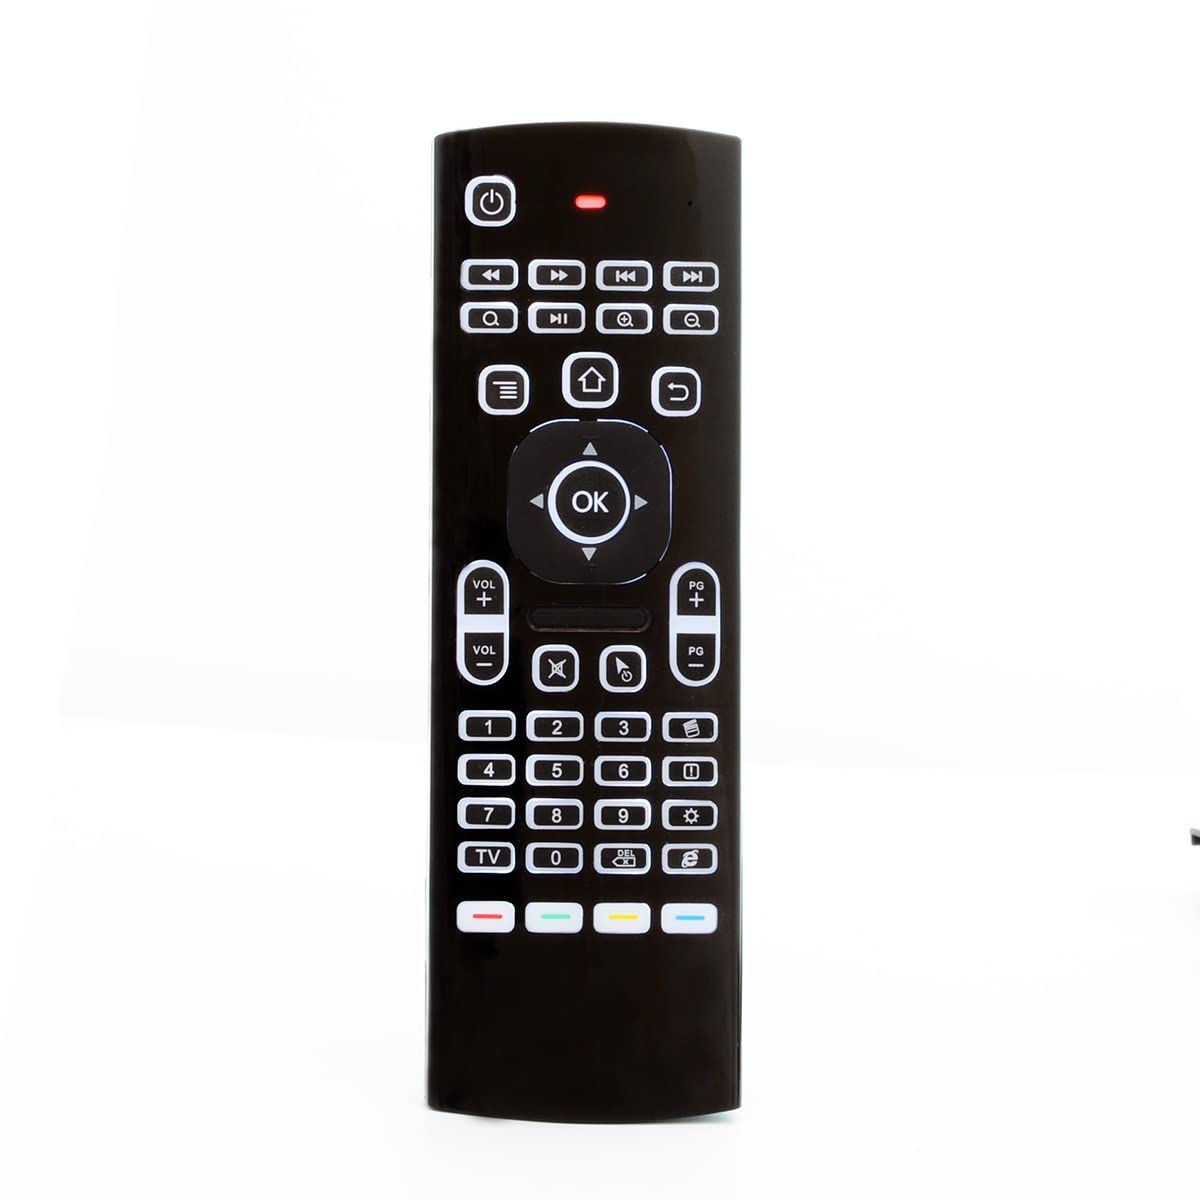 MX3 Pro Mini Keyboard Backlight Fly Remote Mouse,Android TV Remote Control,IR Learning Mini Wireless Keyboard for Android TV Box.HTPC.IPTV.Pad.PS3/PS4